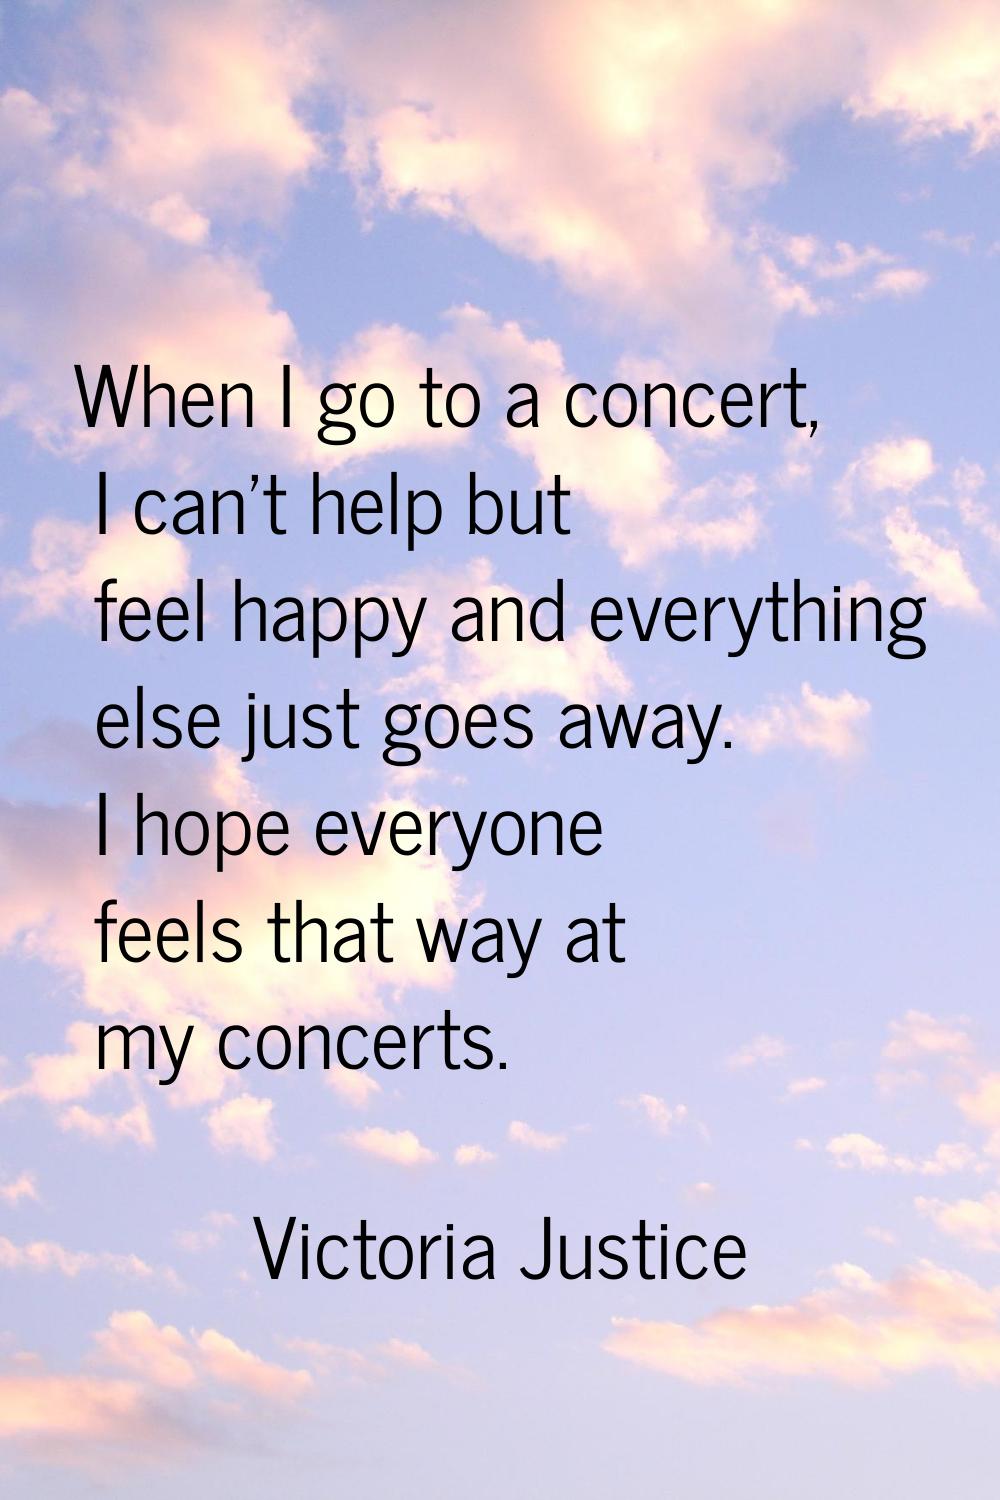 When I go to a concert, I can't help but feel happy and everything else just goes away. I hope ever